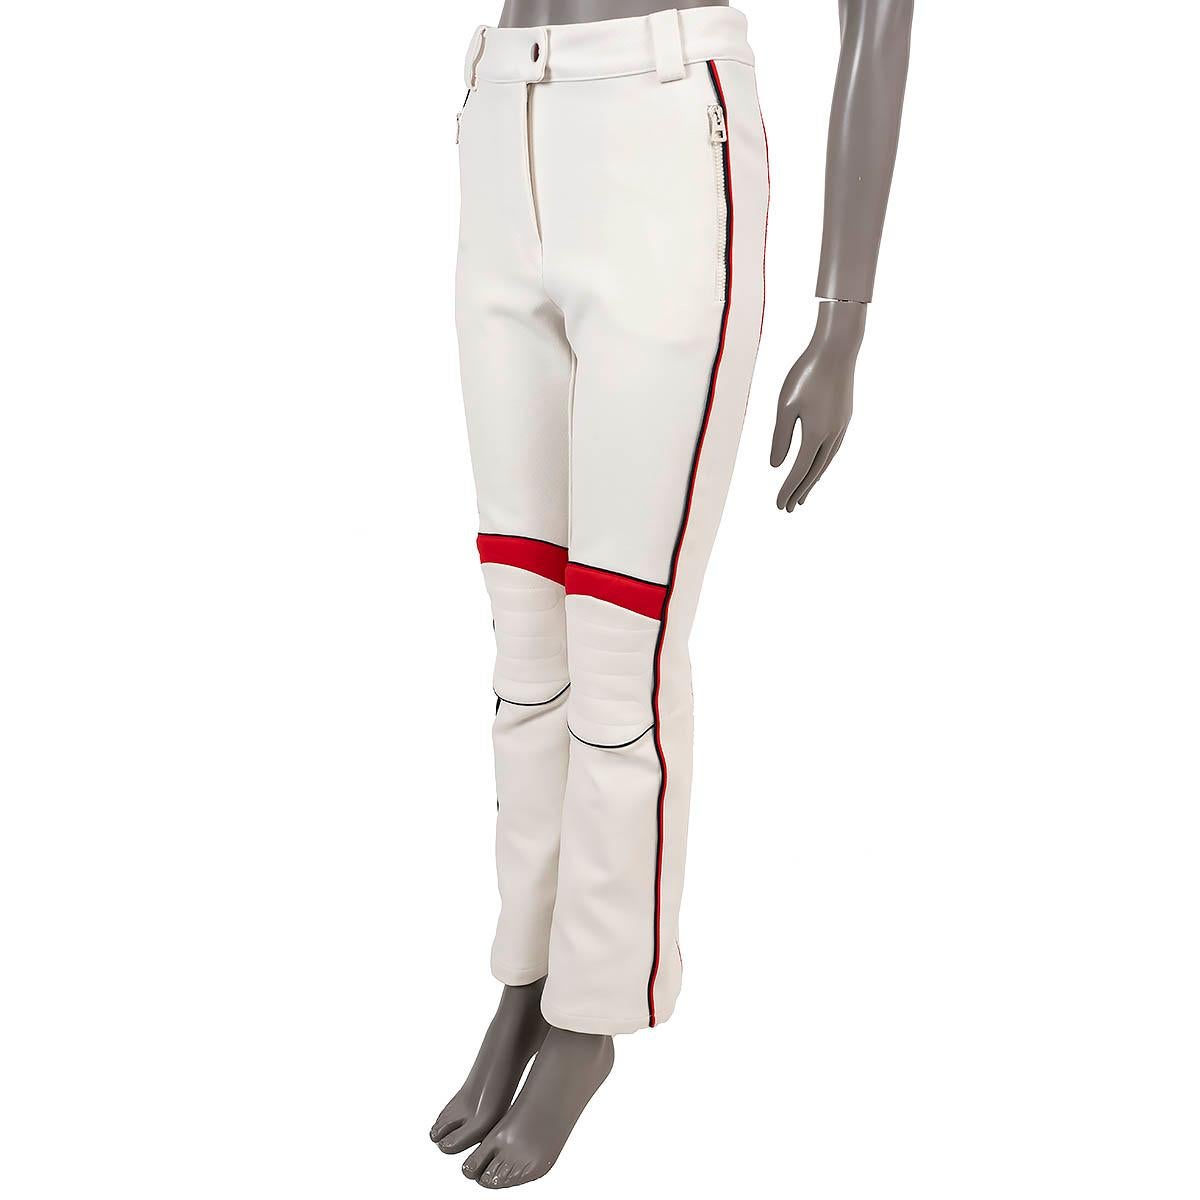 100% authentic Christian Dior ski pants in off-white technical fabric (47% polyamide, 38% acrylic, 13% wool & 2% elastane). Feature a flared leg with zipped hem, logo side stripe and quilted knees. Closes with a concealed snap and zipper on the